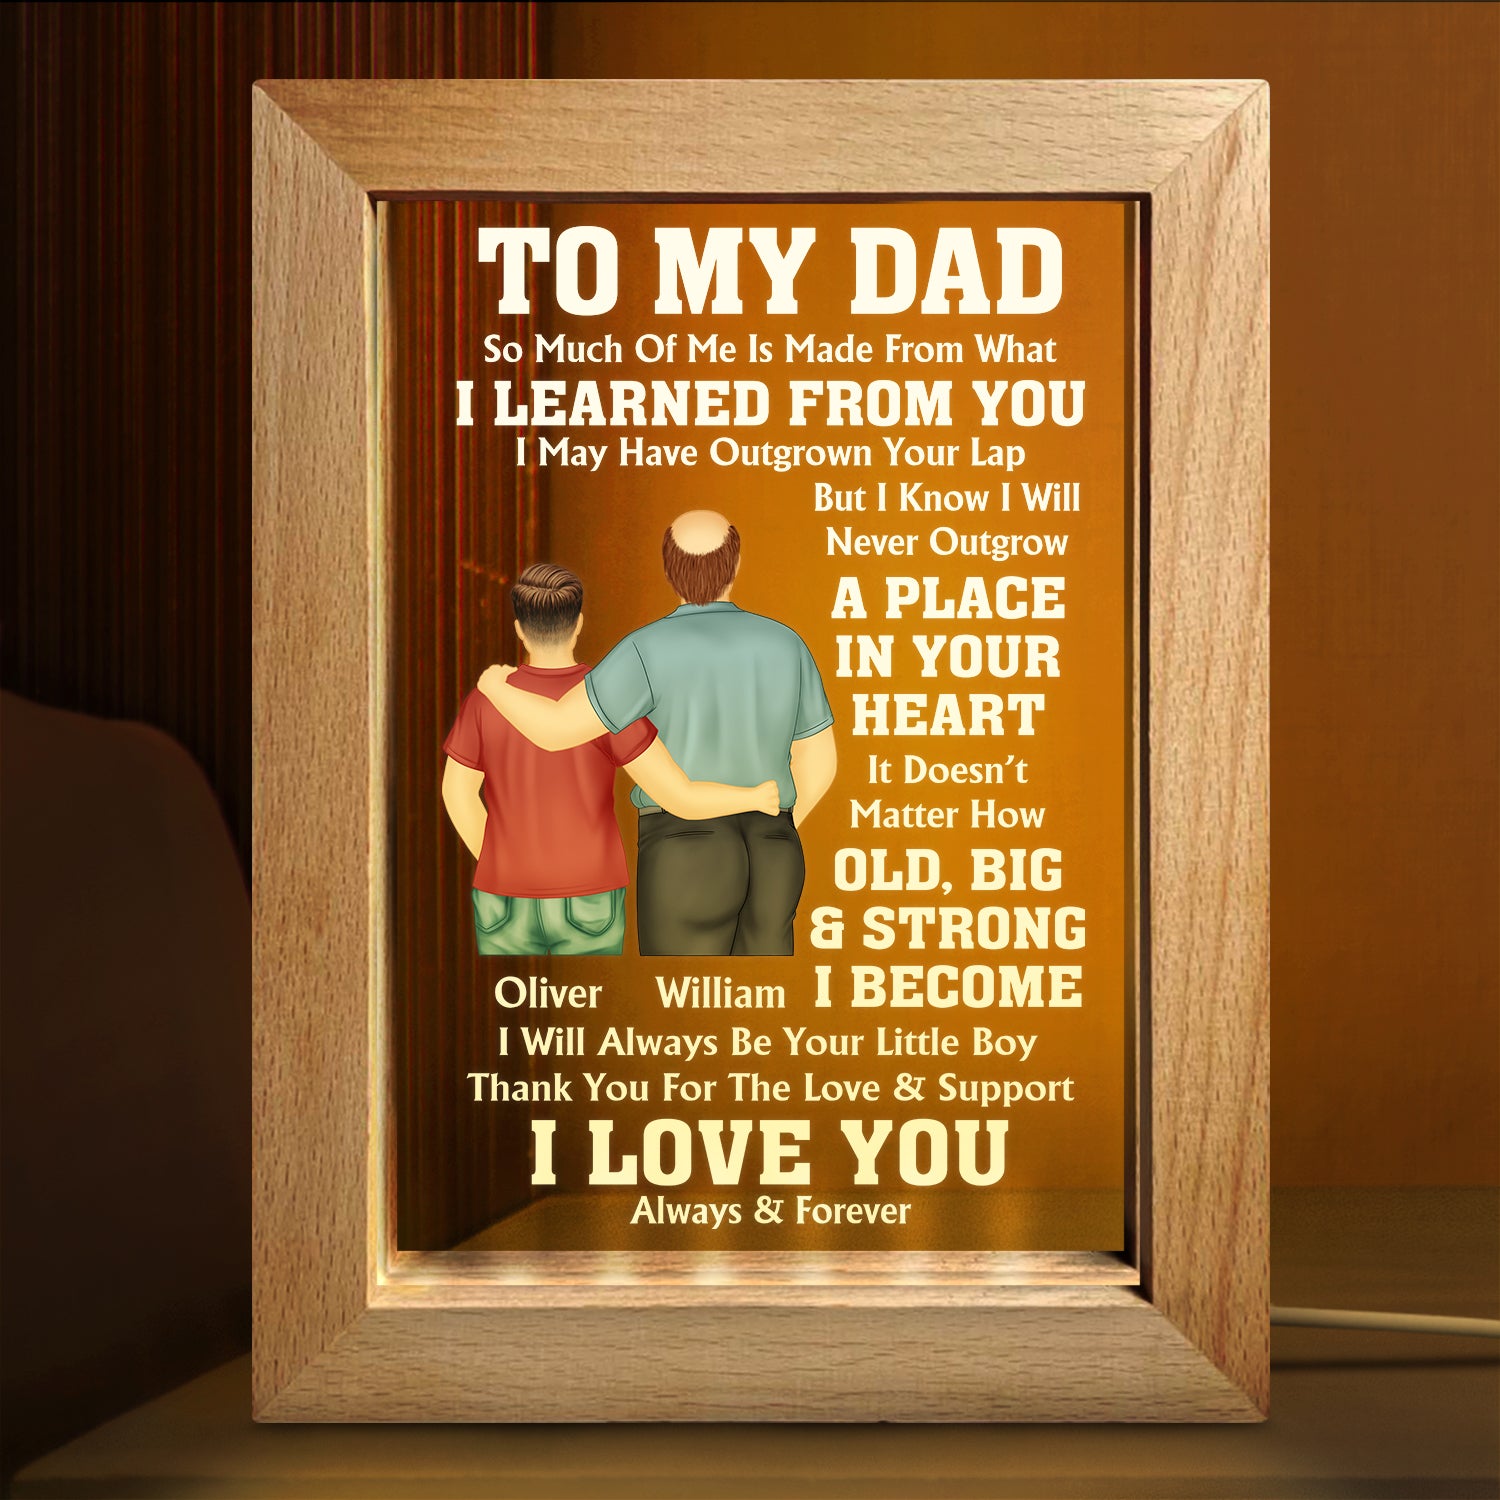 So Much Of Me - Gift For Dad, Father, Grandpa - Personalized Frame Lamp